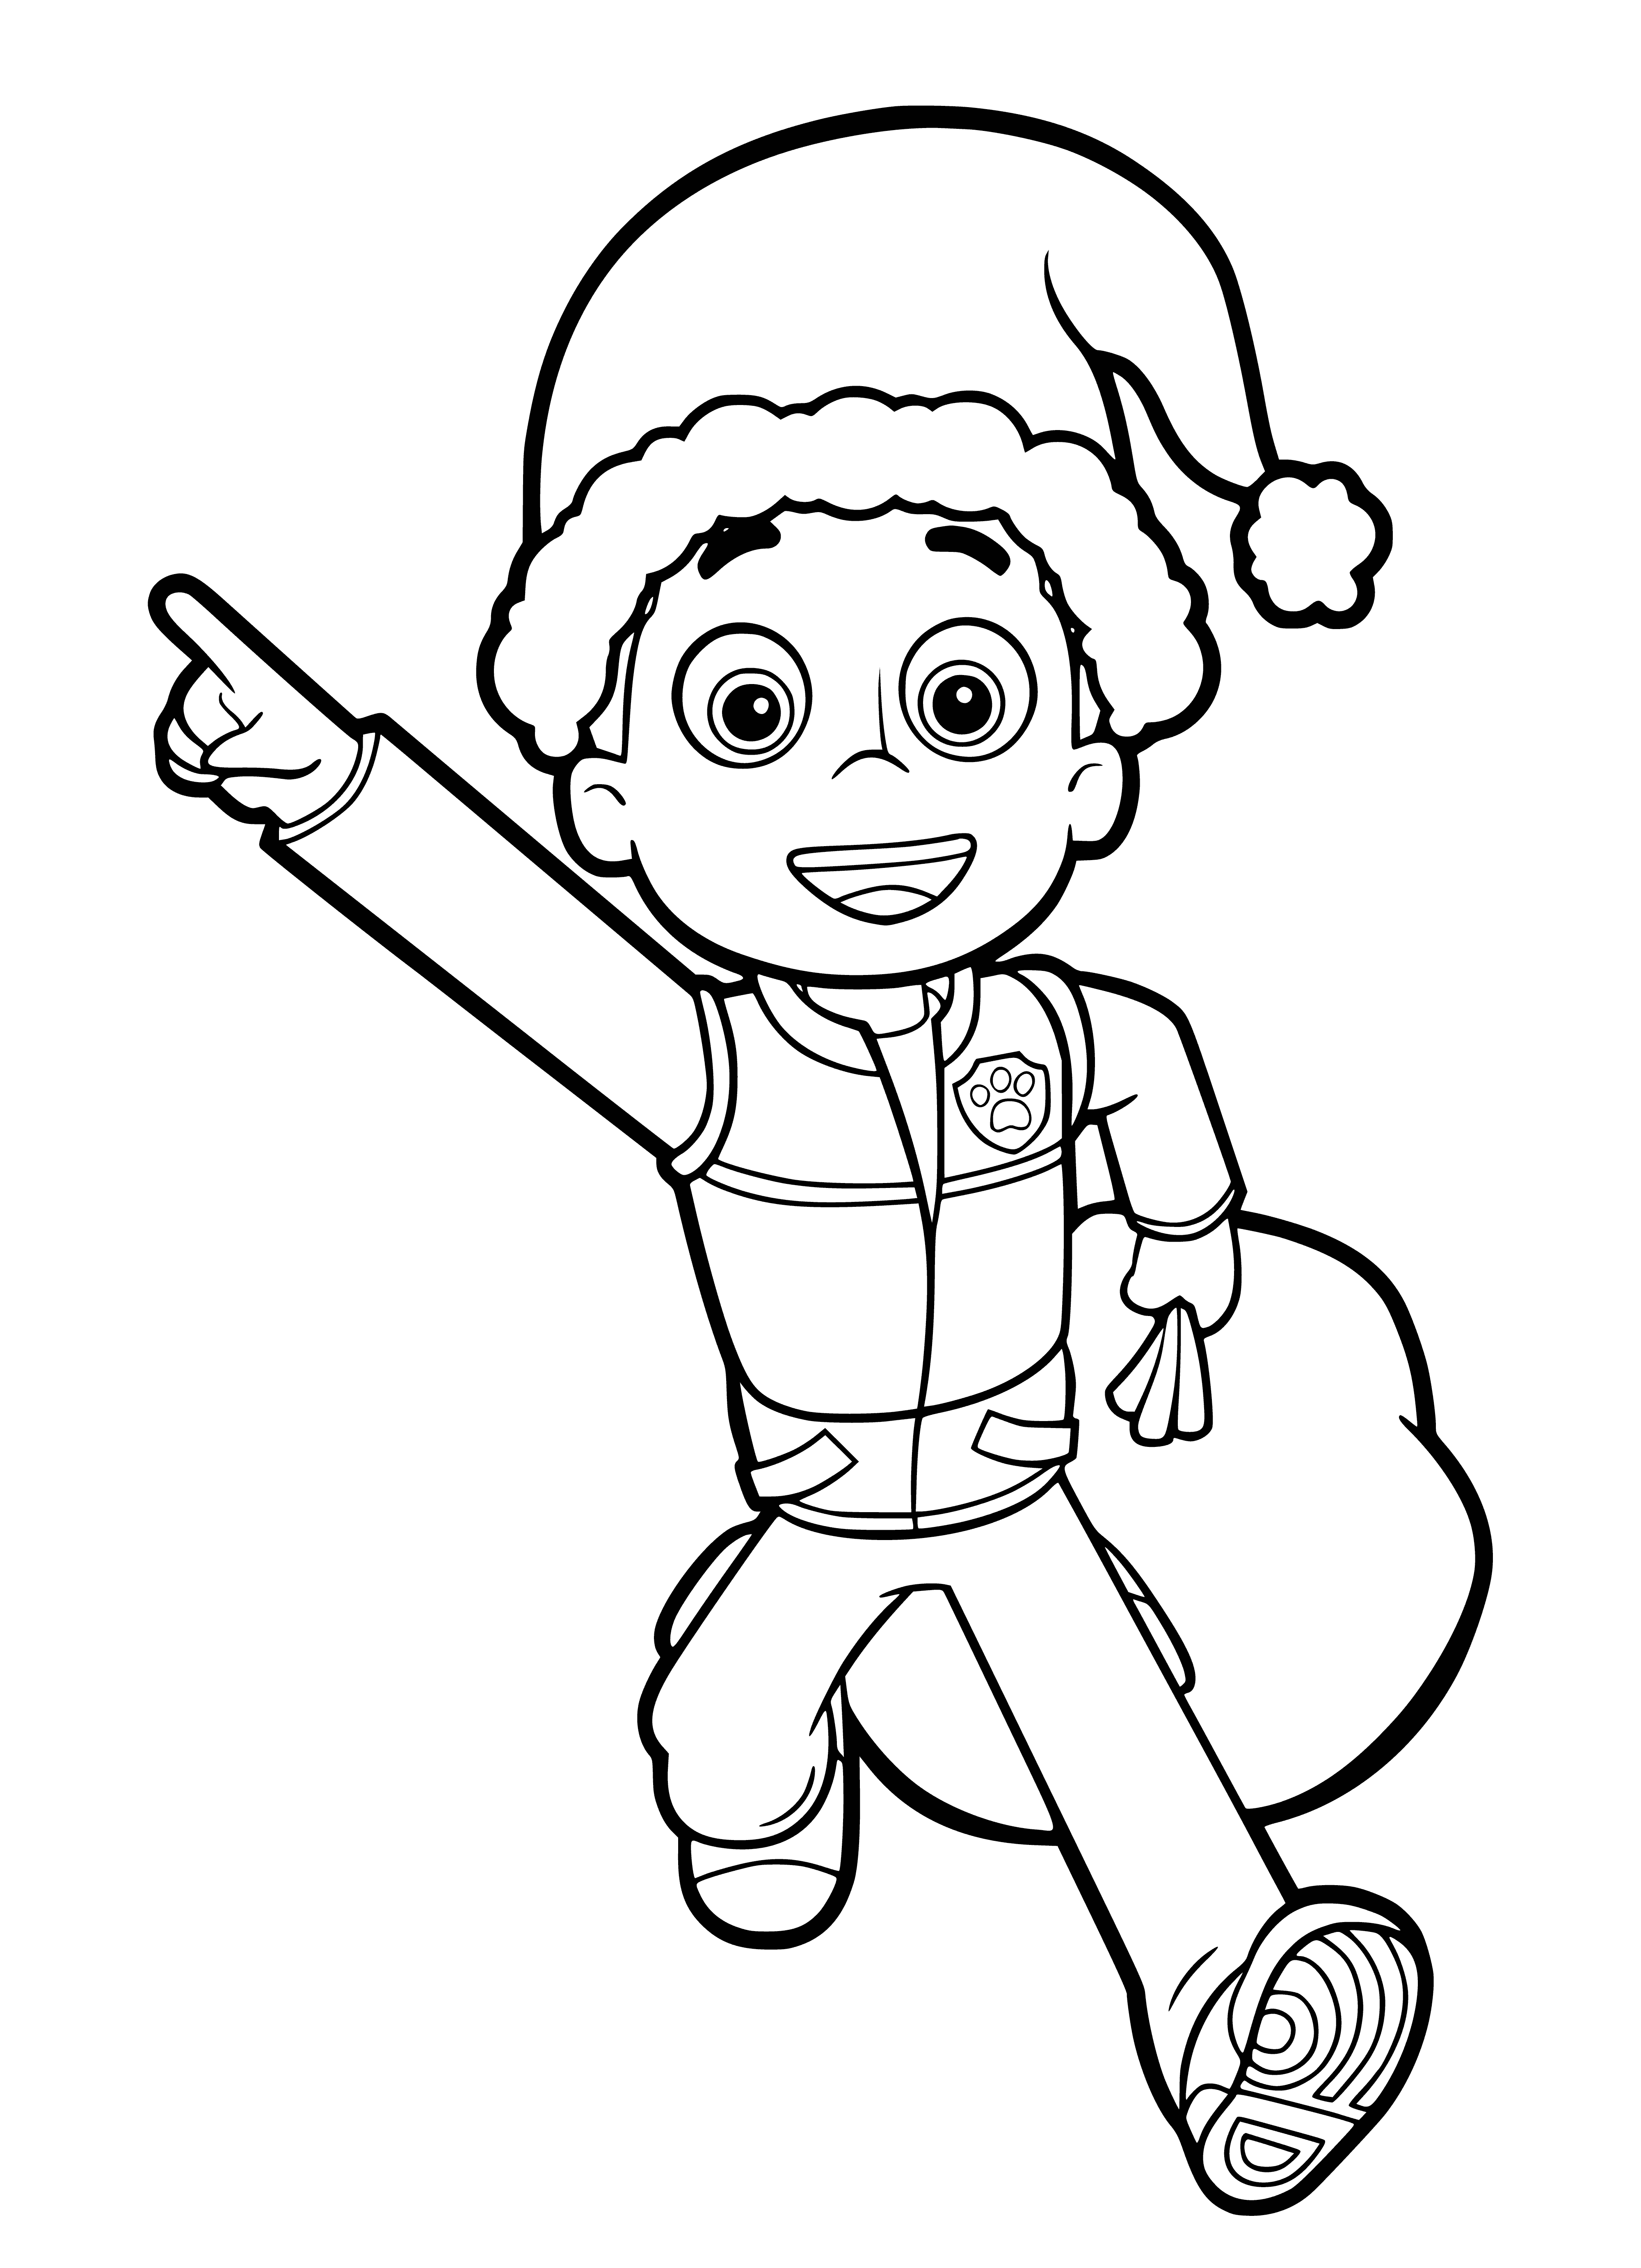 coloring page: PAW Patrol Puppy Putrul Commander is a tan puppet that fits on your hand. Black spots, brown nose, eyes, mouth, perked up ears and black tail.